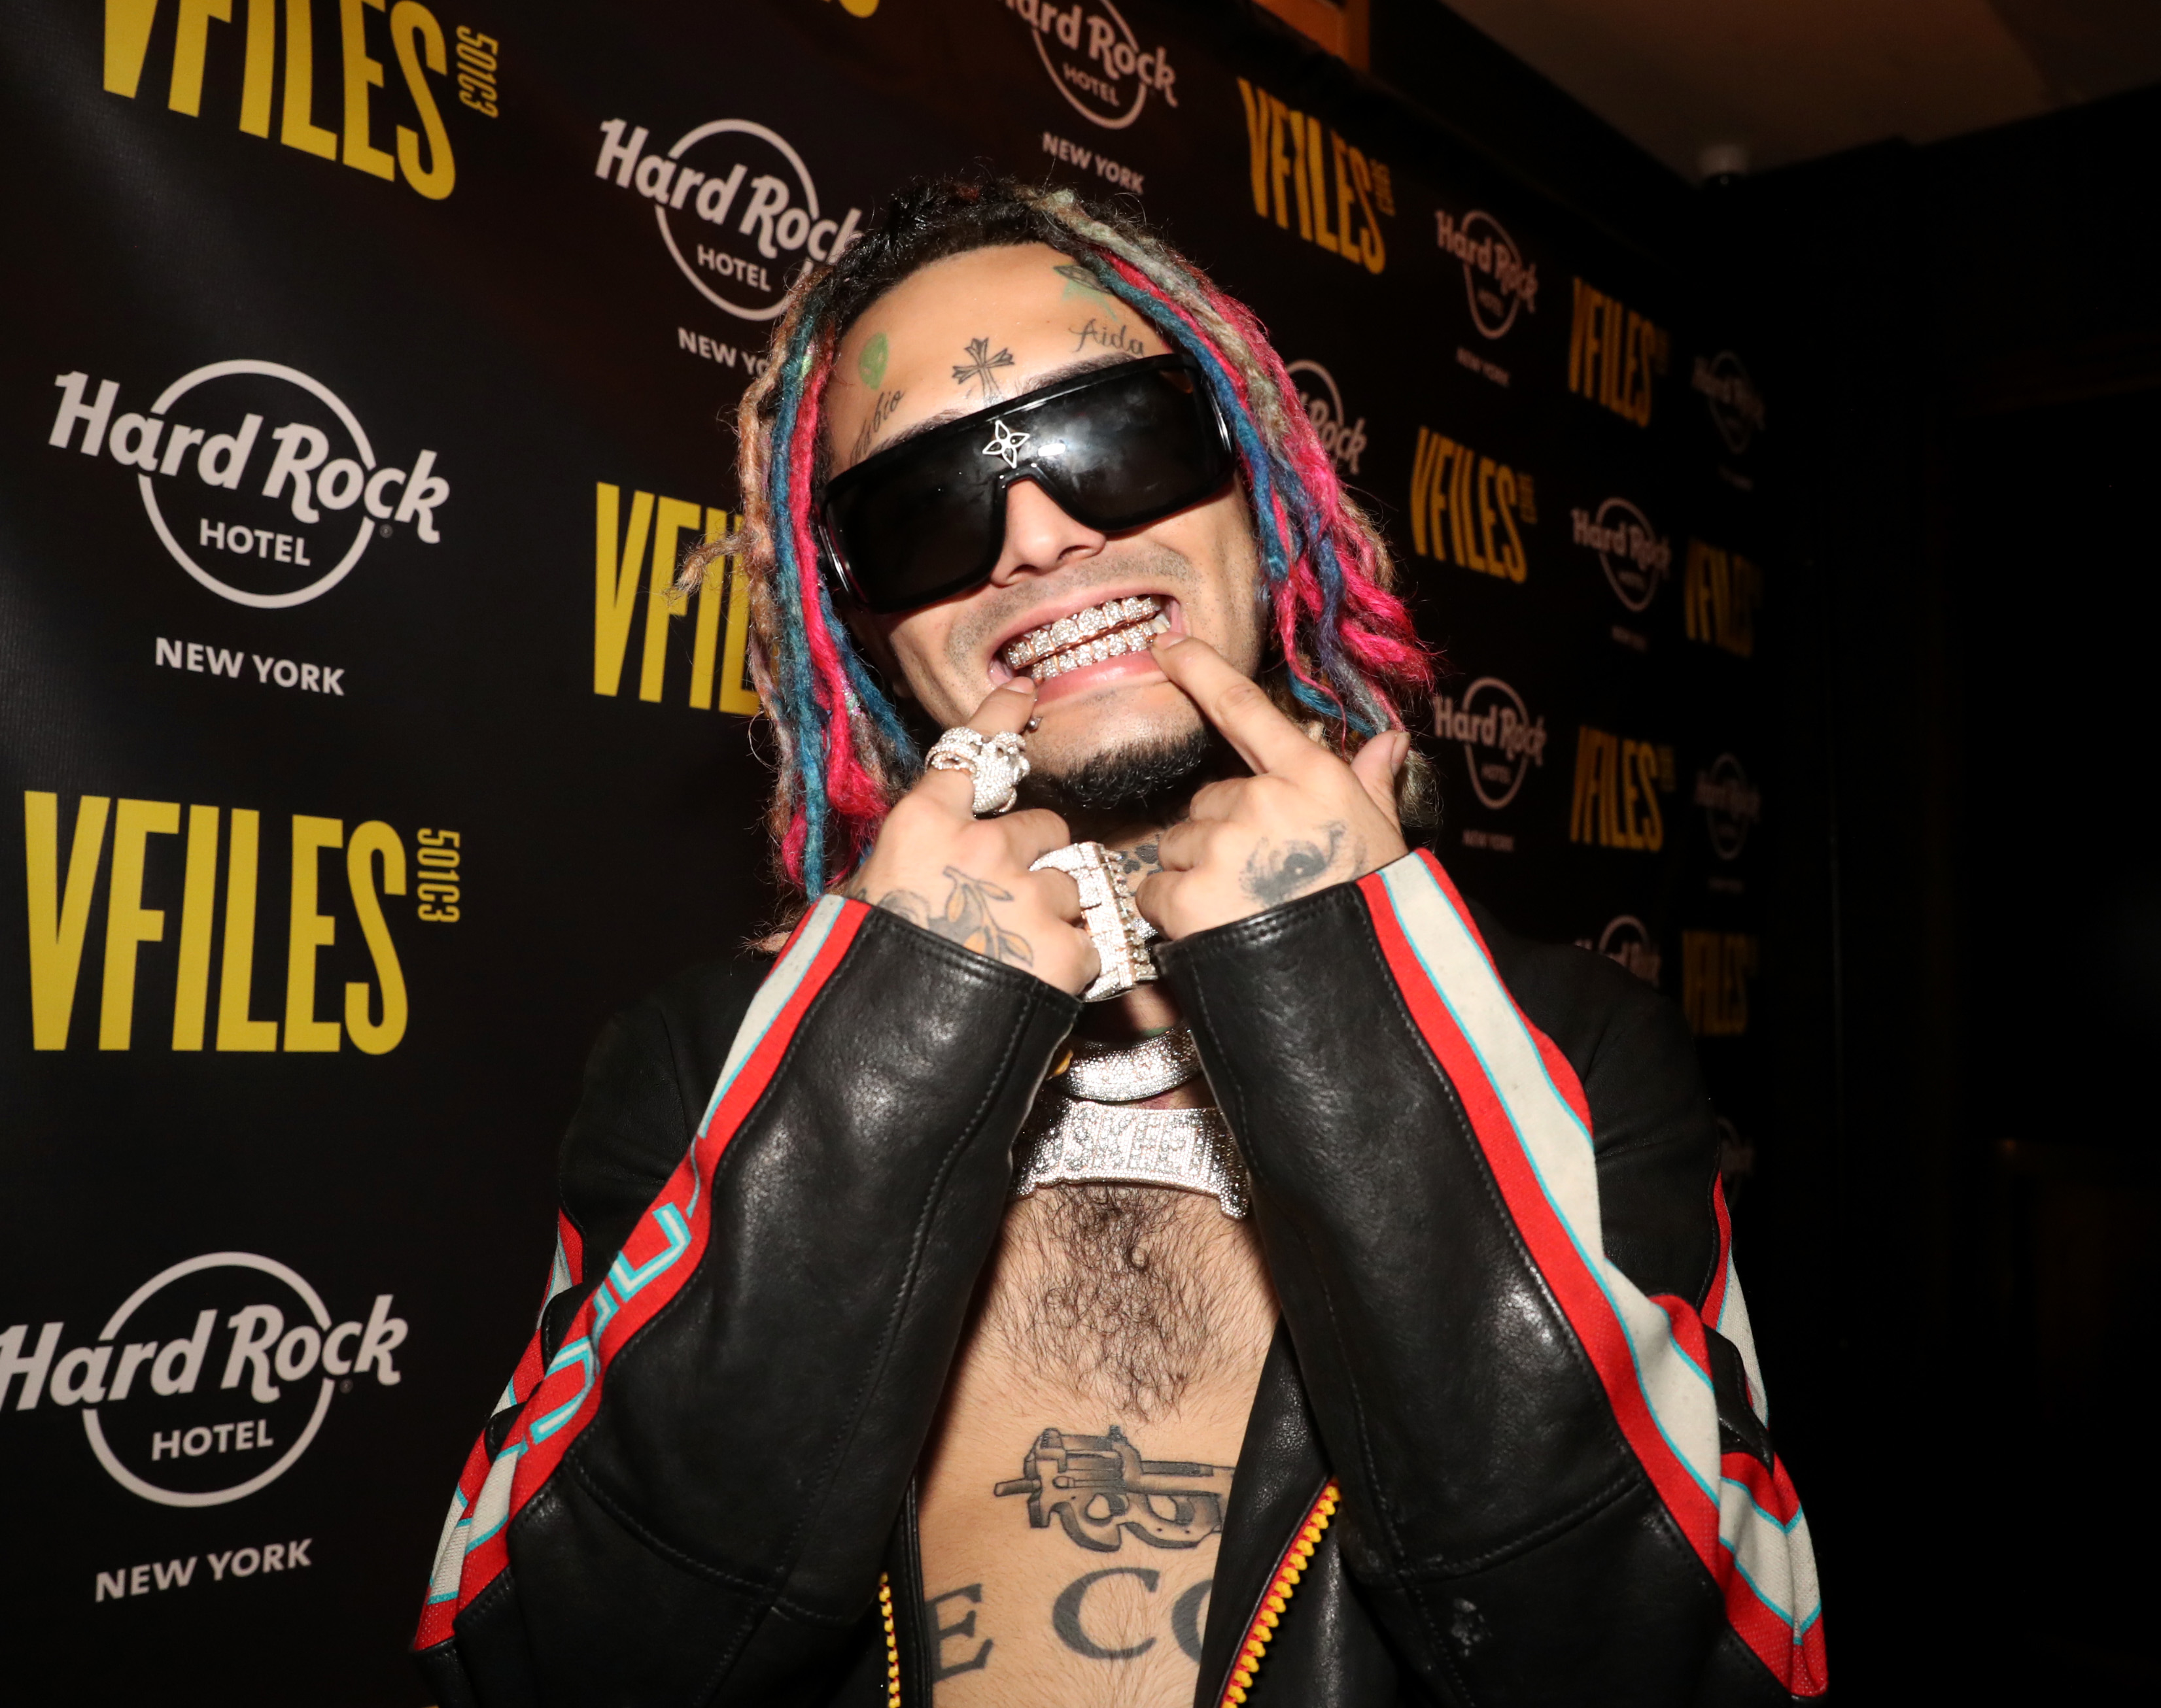 Person posing with hands near face, wearing sunglasses and a striped jacket at a Hard Rock event